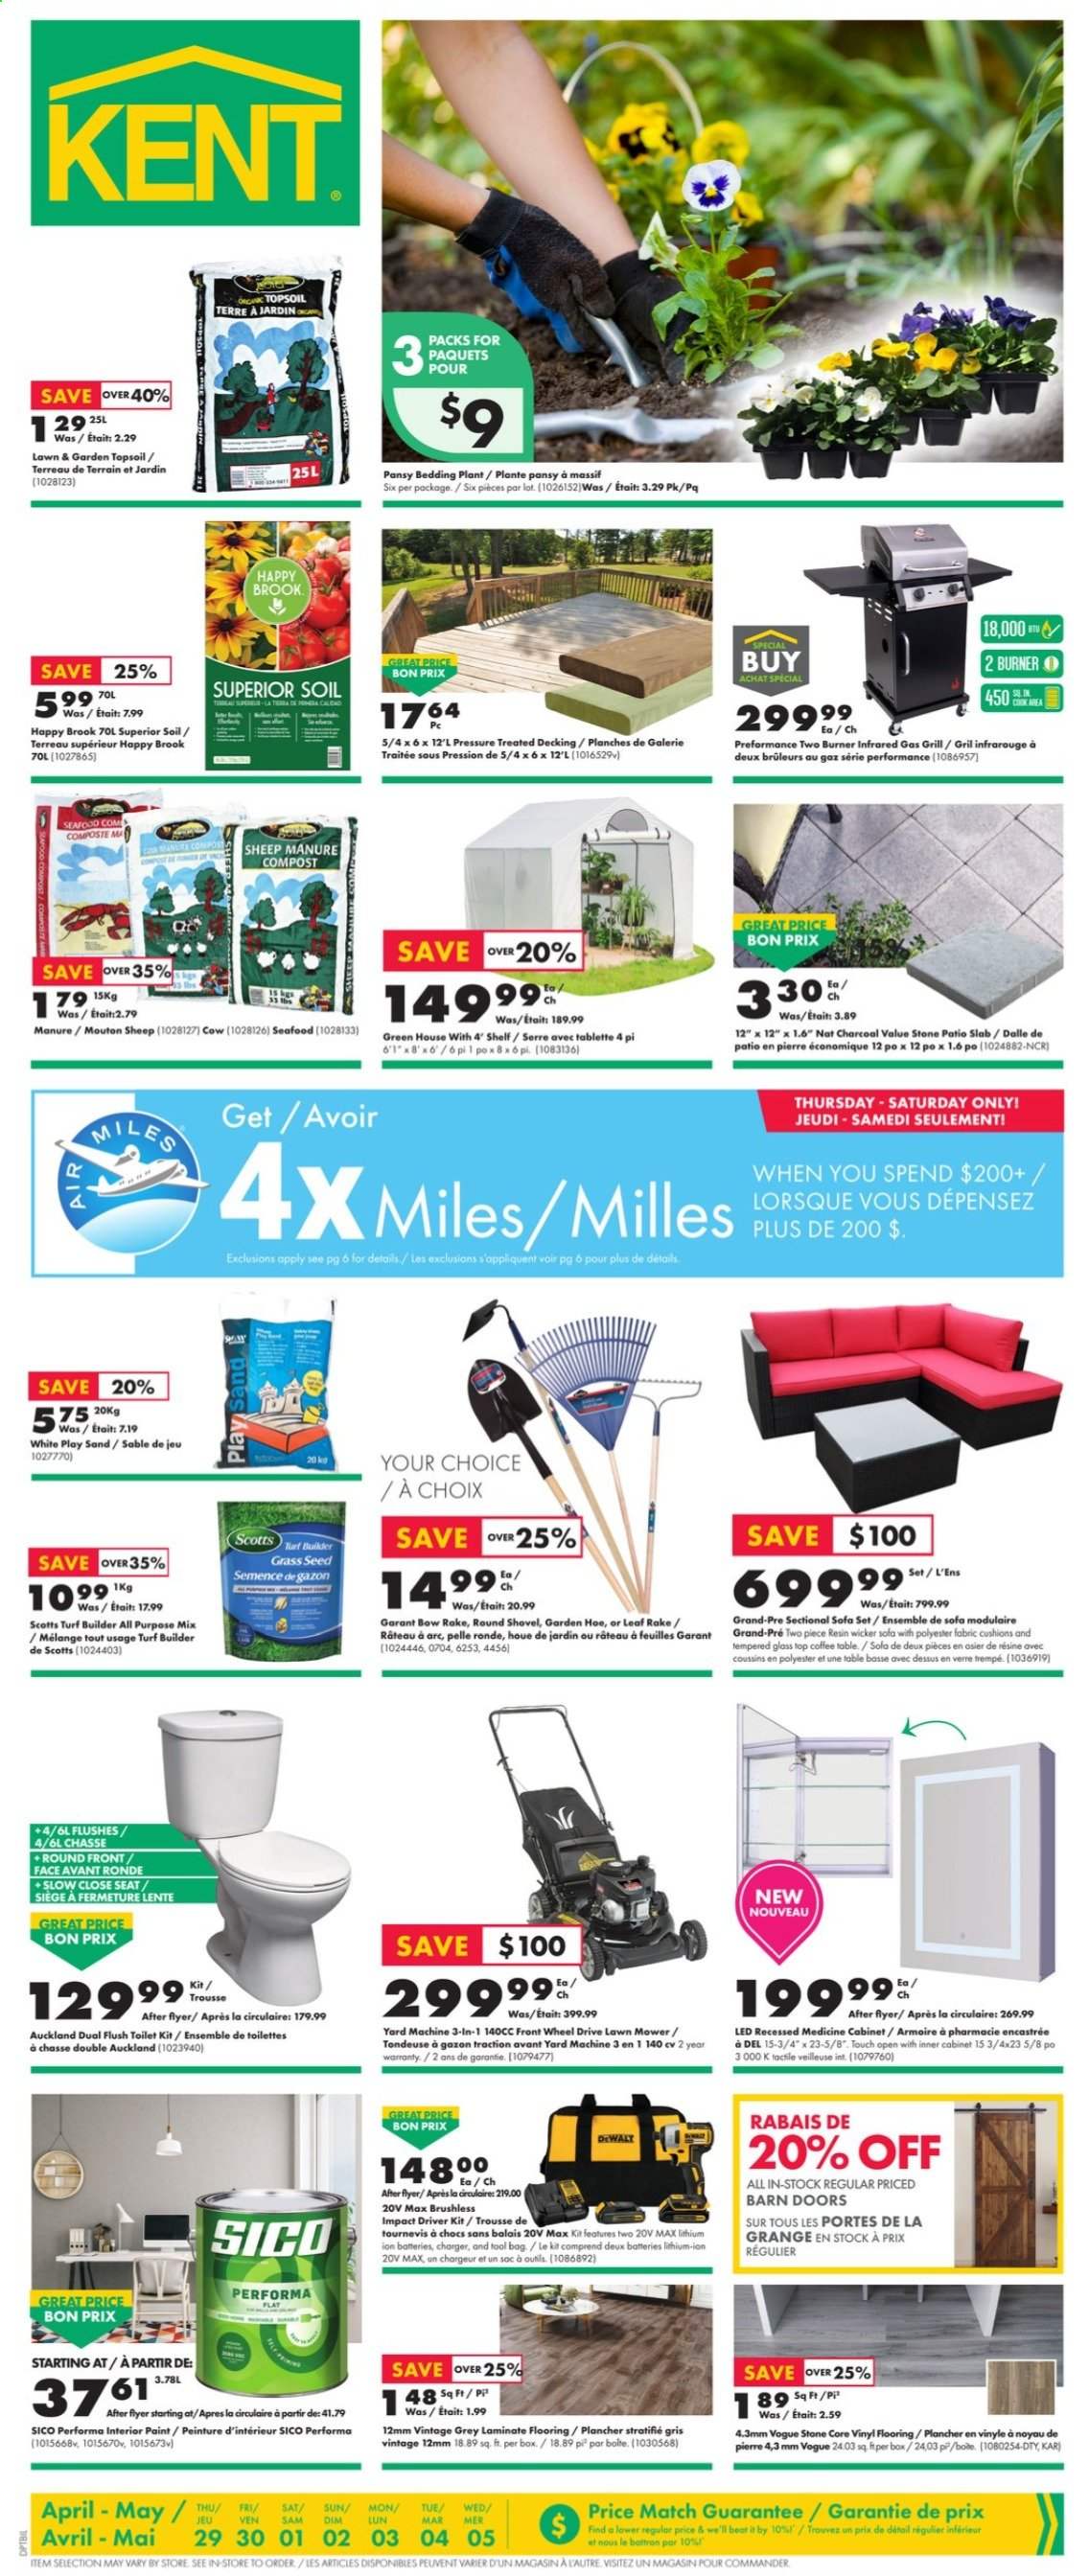 thumbnail - Kent Flyer - April 29, 2021 - May 05, 2021 - Sales products - bag, bedding, cushion, table, toilet, paint, flooring, laminate floor, DeWALT, impact driver, lawn mower, shovel, cabinet, tool bag, gas grill, grill, plant seeds, turf builder, grass seed, compost. Page 1.